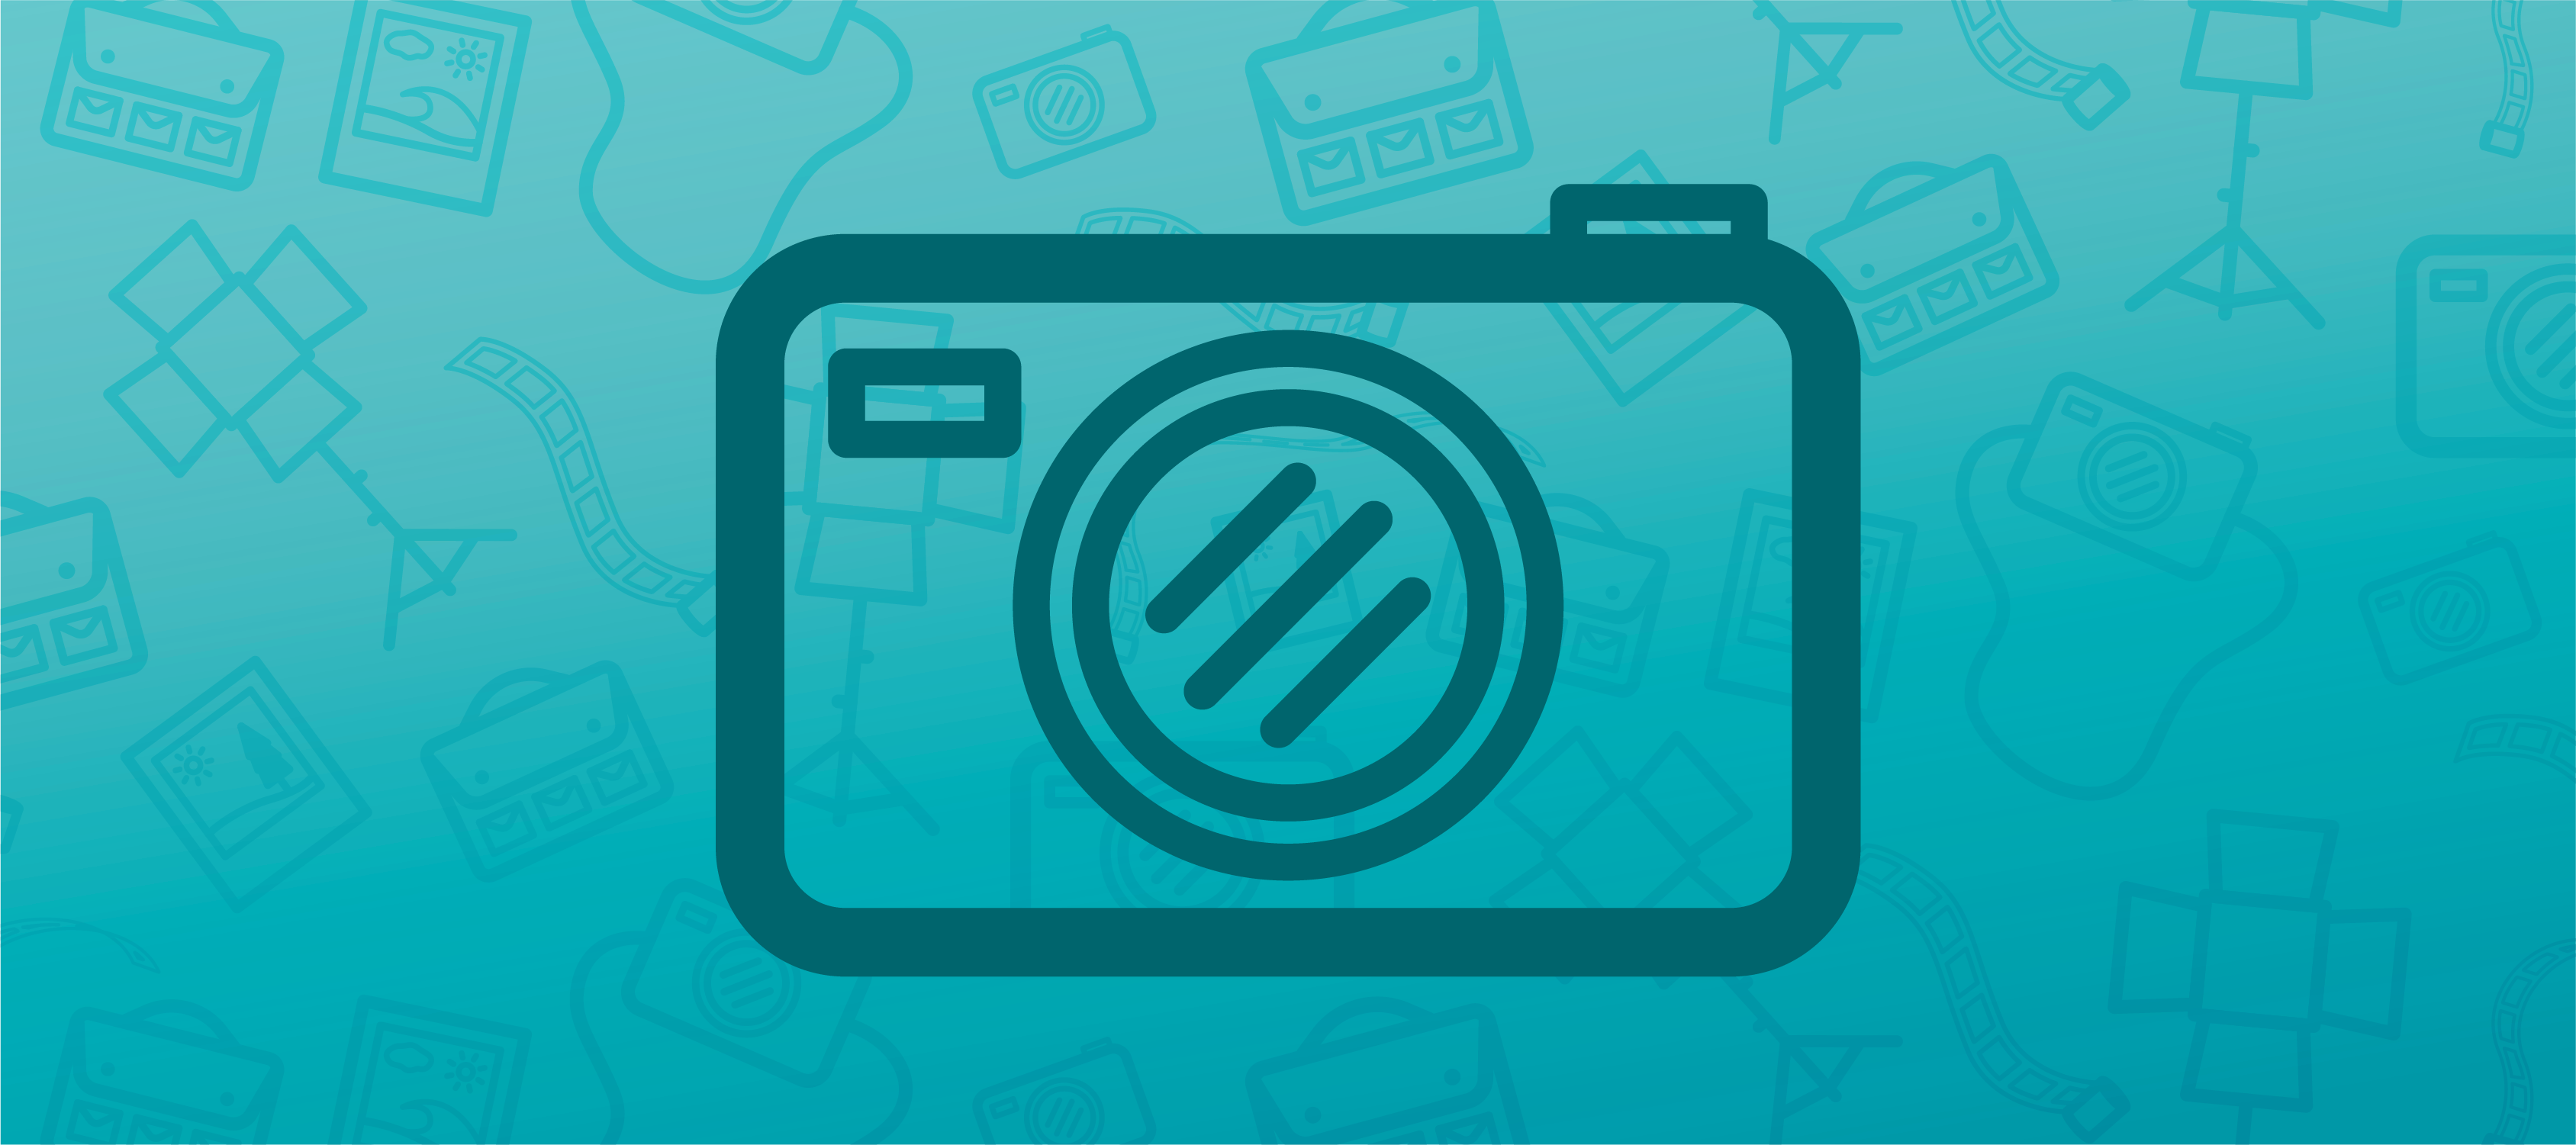 A blue header image featuring an icon of a camera in the center and faded photography icons in the background